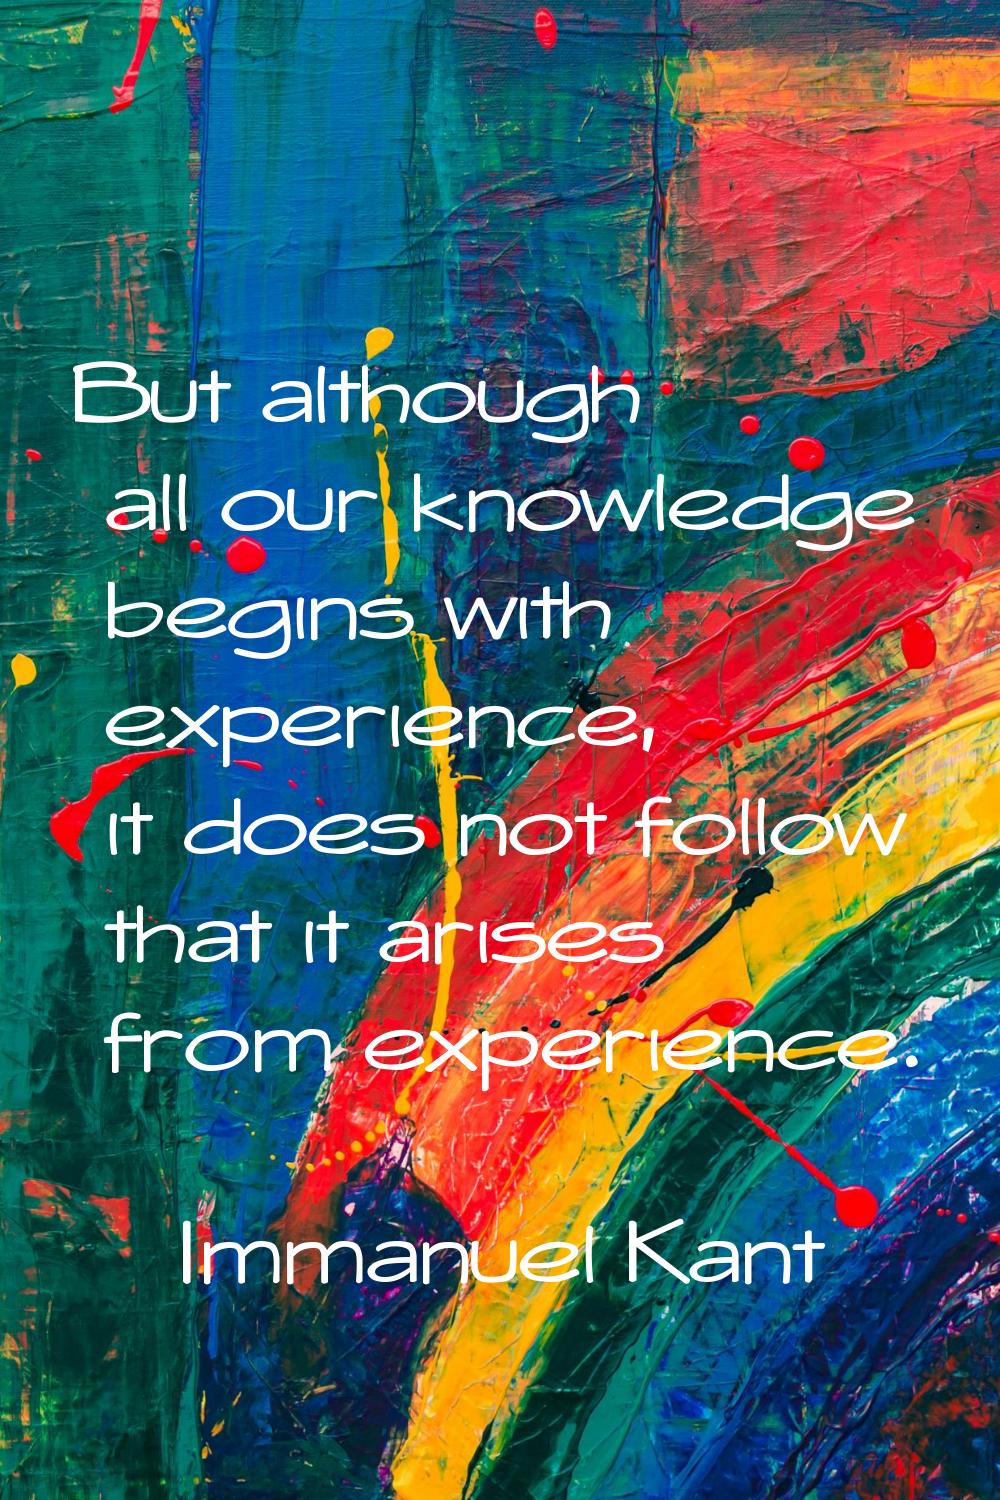 But although all our knowledge begins with experience, it does not follow that it arises from exper